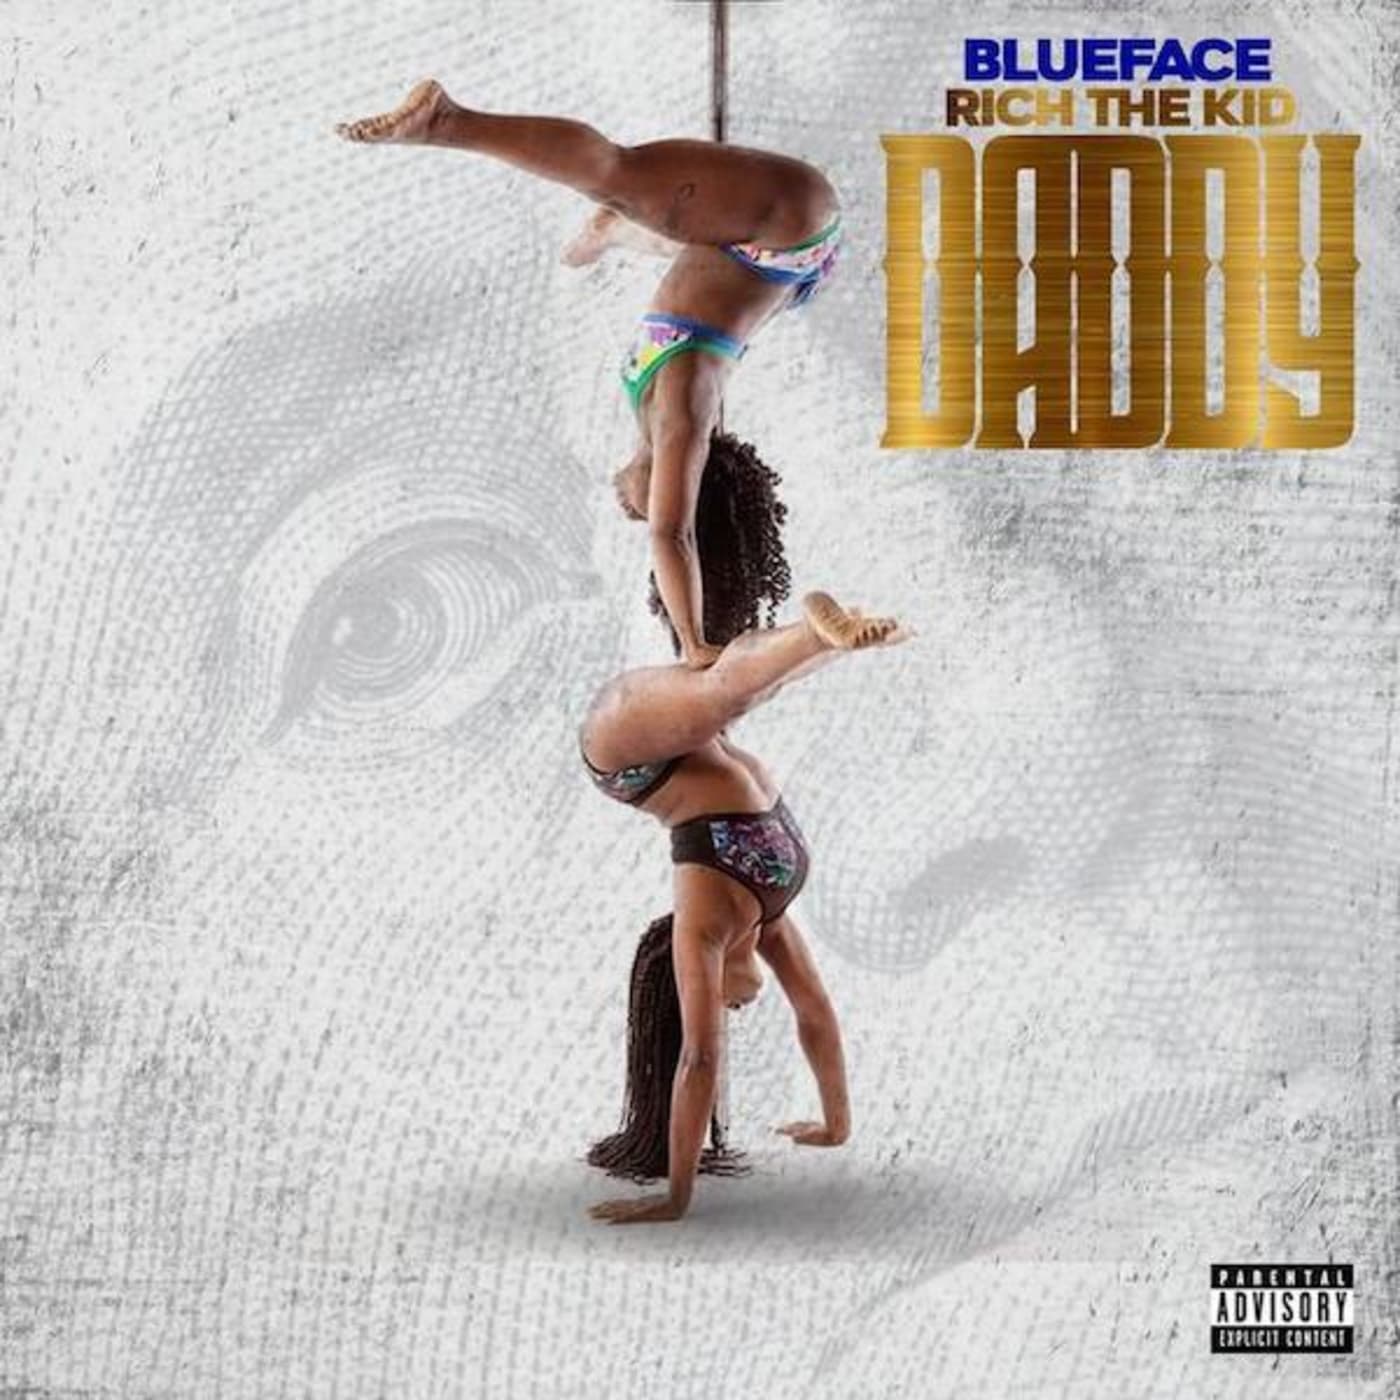 Blueface x Rich the Kid "Daddy"